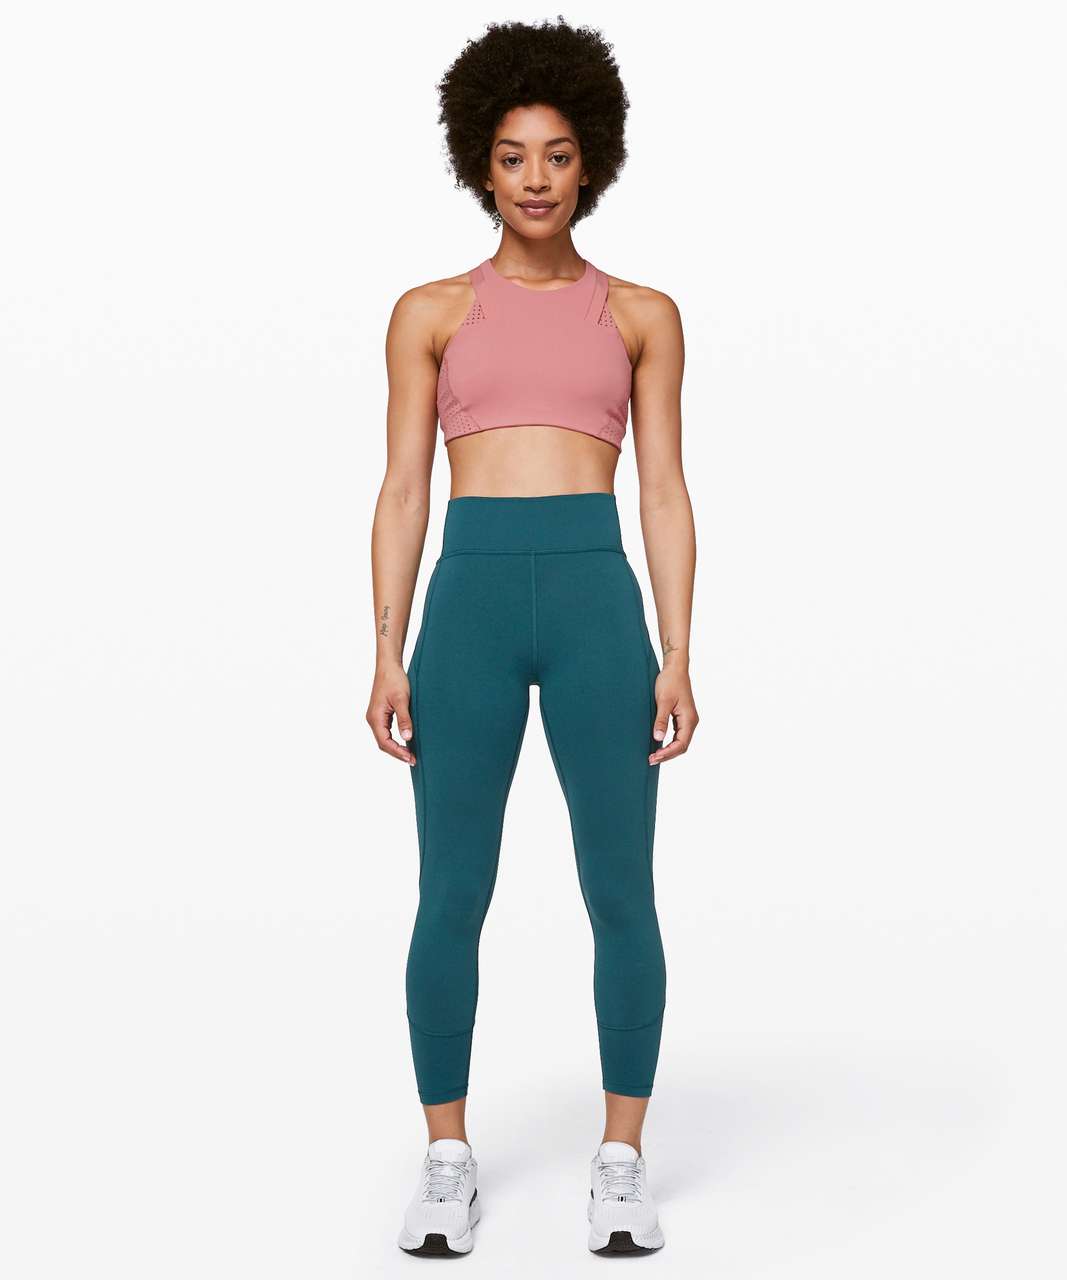 Lululemon In Movement Crop *Everlux 19 Nocturnal Teal